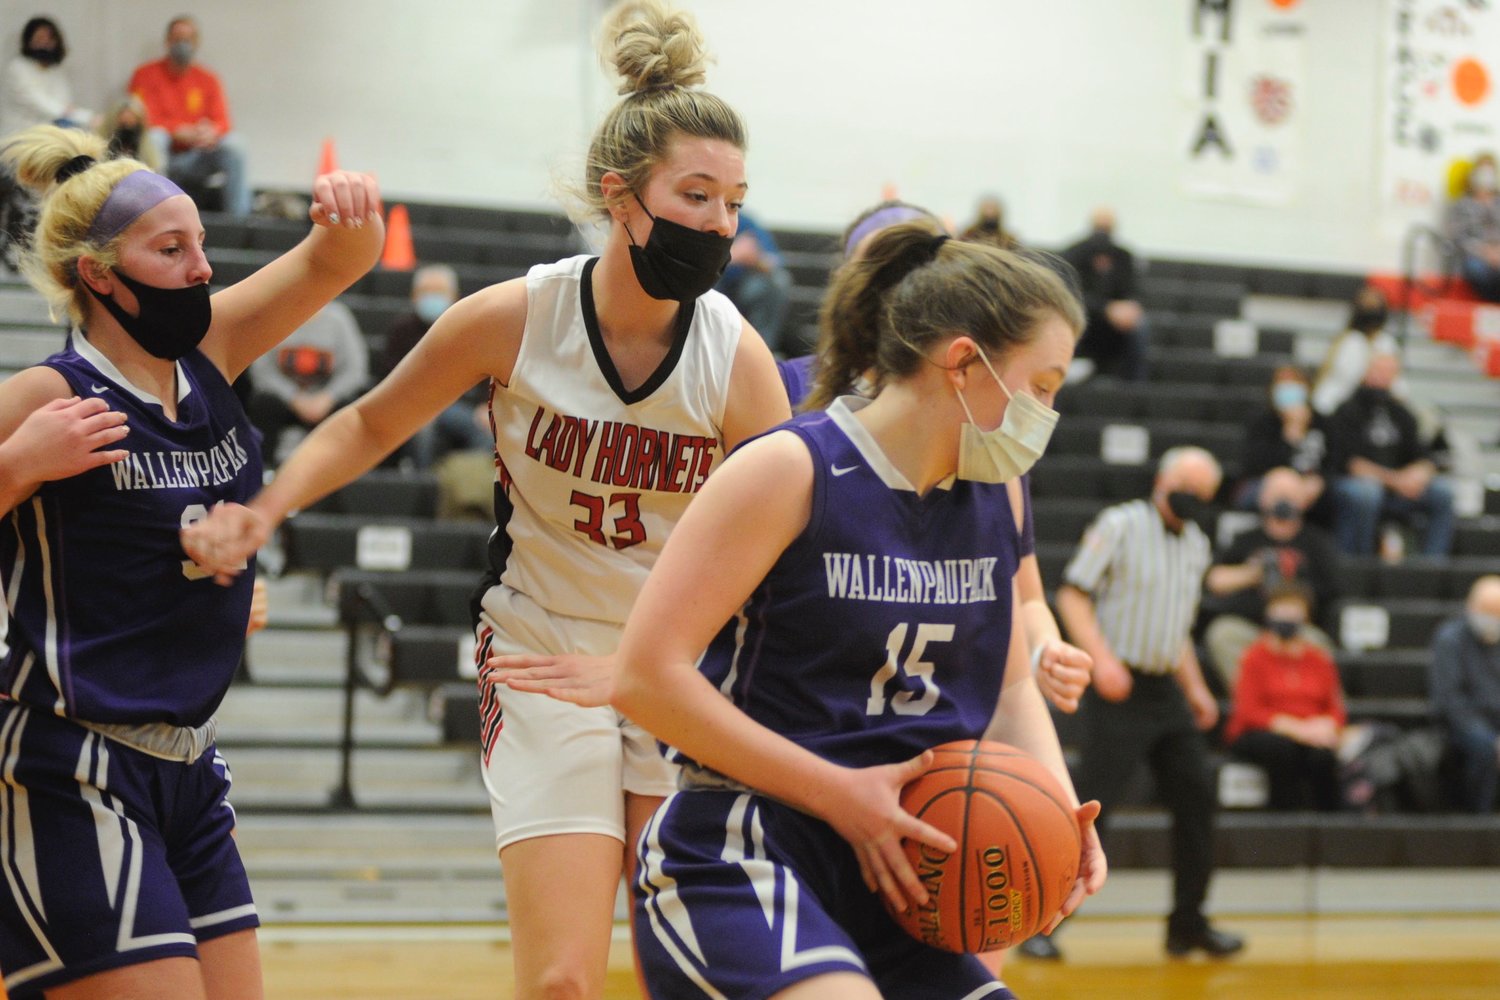 Decision on the boards. Honesdale junior bucketeer Chloe Lyle closes in on Wallenpaupack’s Megan Desmet who posted a game-high 26 points, including going 17/21 at the free-throw line.